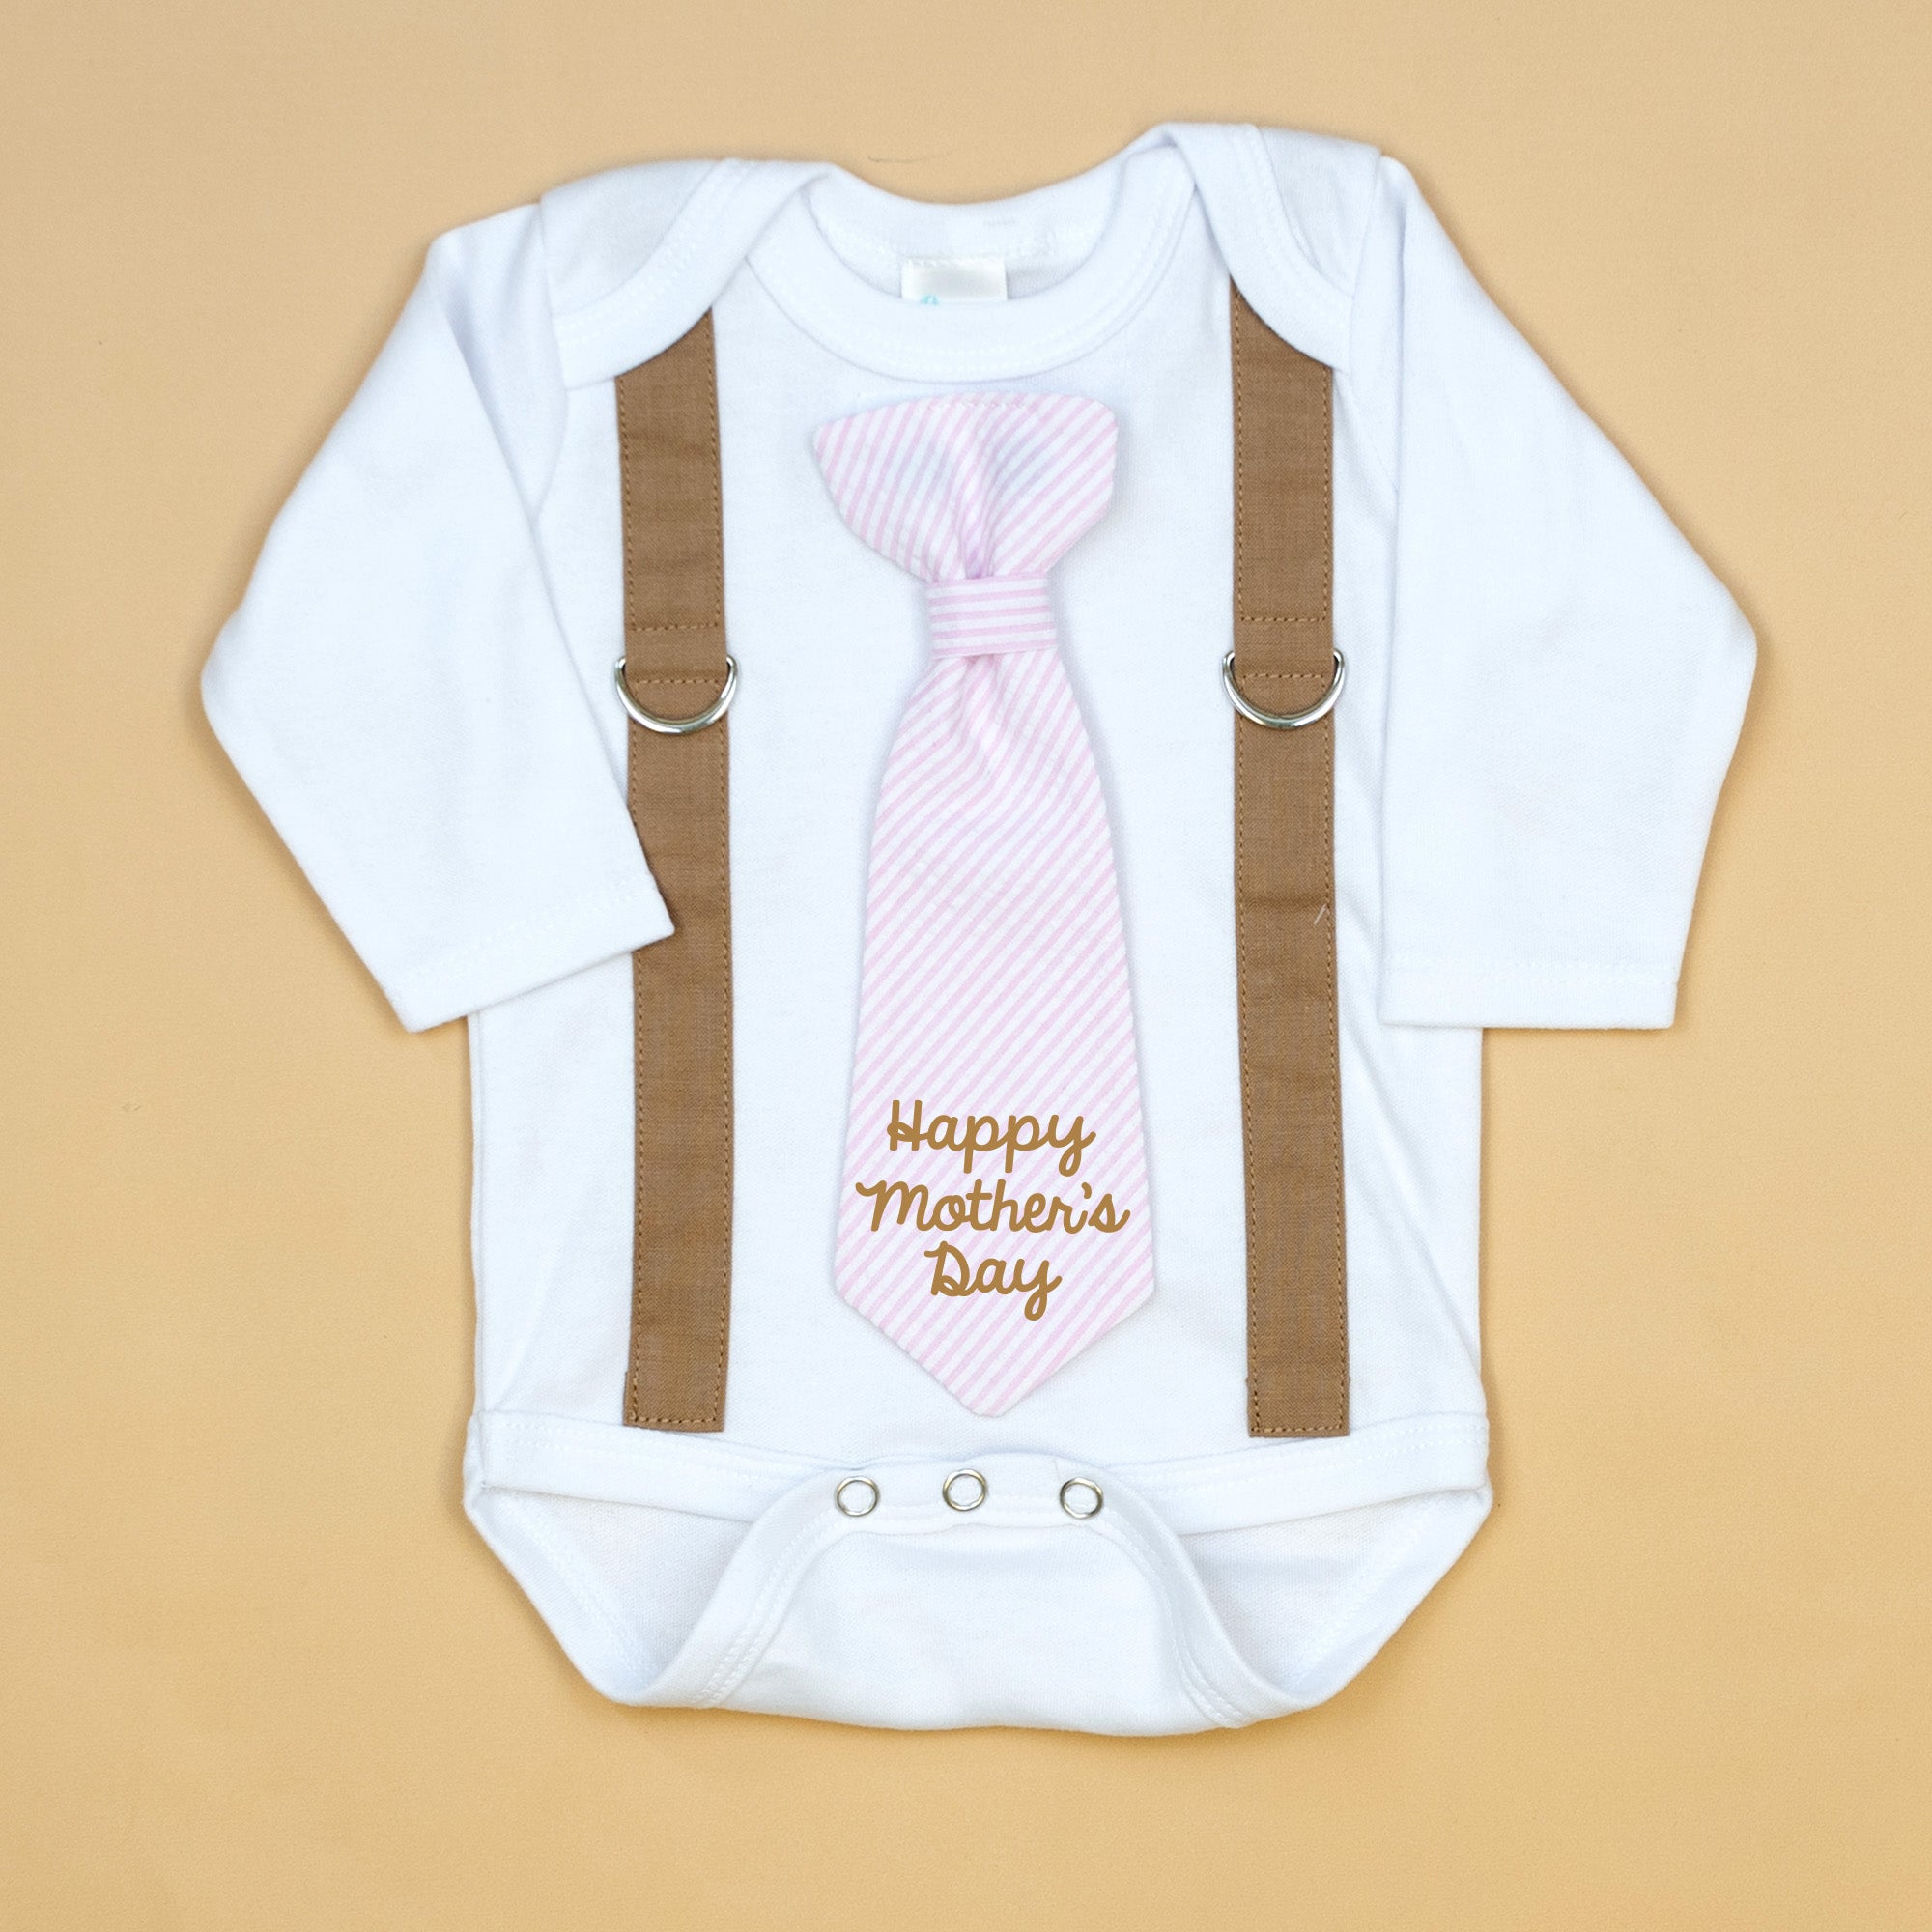 Cuddle Sleep Dream Oh Snap Happy Mother's Day / NB Short Sleeve Bodysuit Mocha Suspenders | Mother's Day Tie